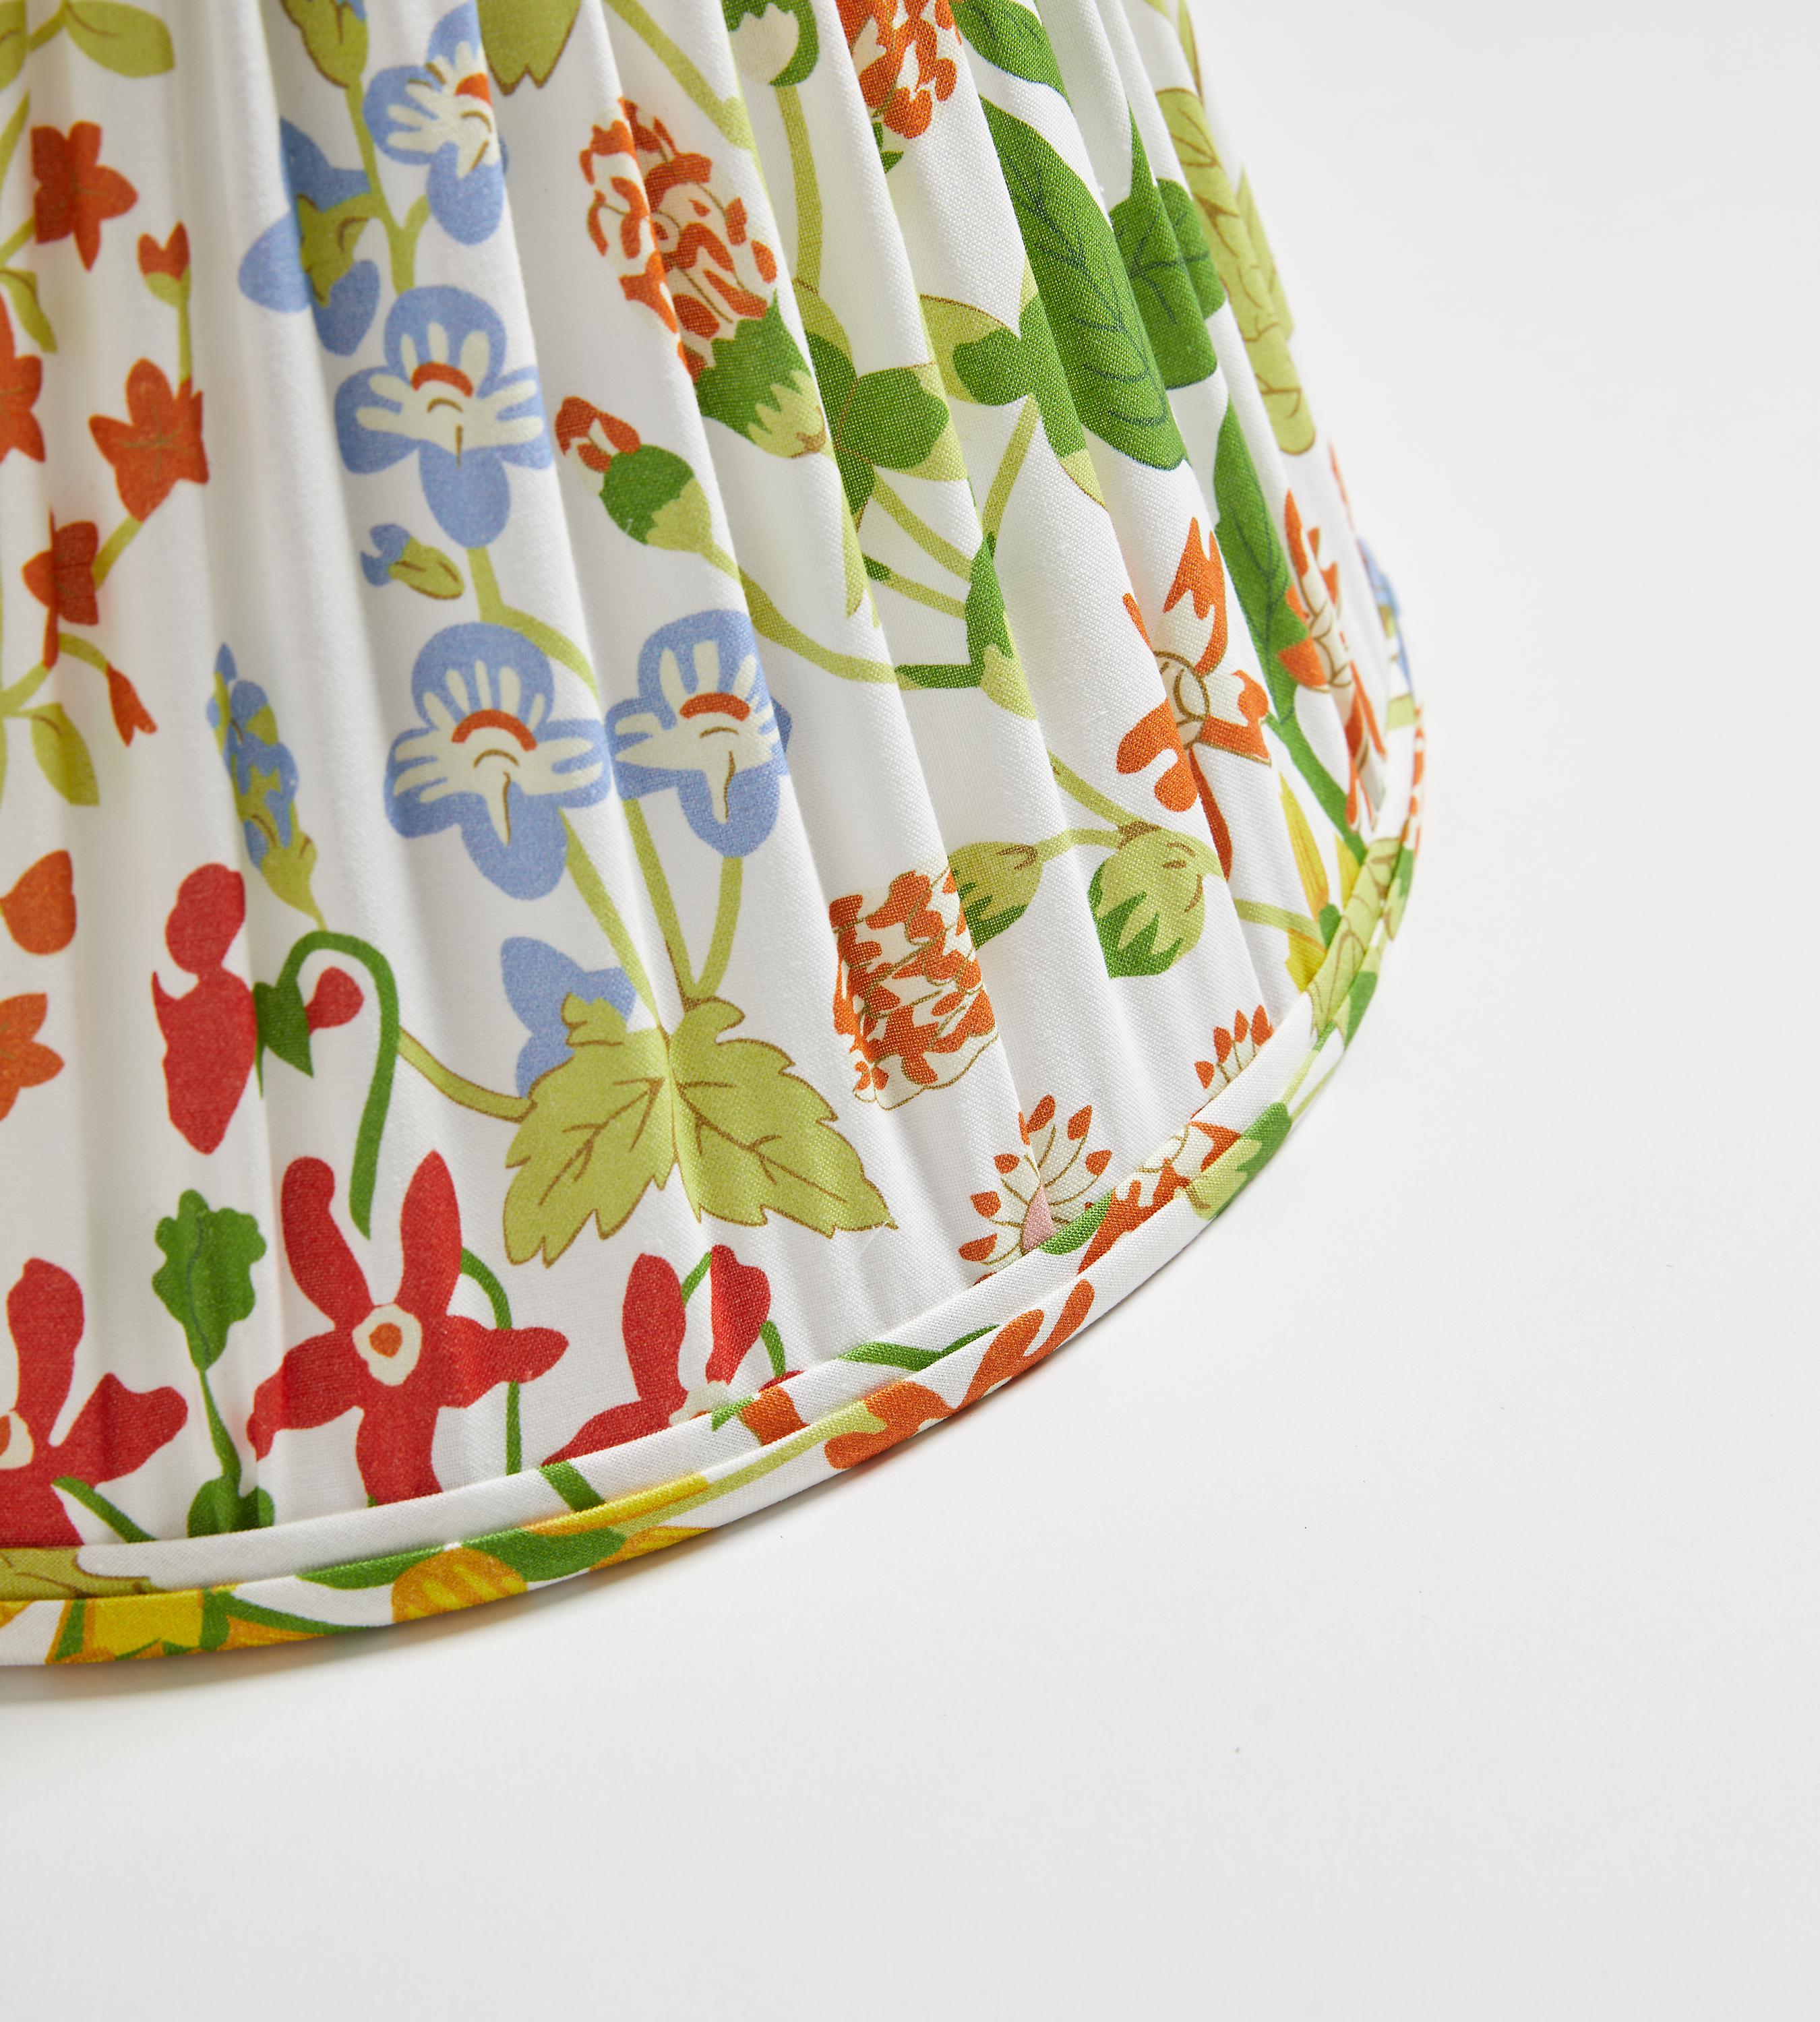 a well-loved pattern from Hinson, is available in printed fabric, wallcovering, luxurious pillows, and now, beautiful, handcrafted lampshades in drum and pleated styles. This energetic, allover pattern features graphic bursts of color.

Hand